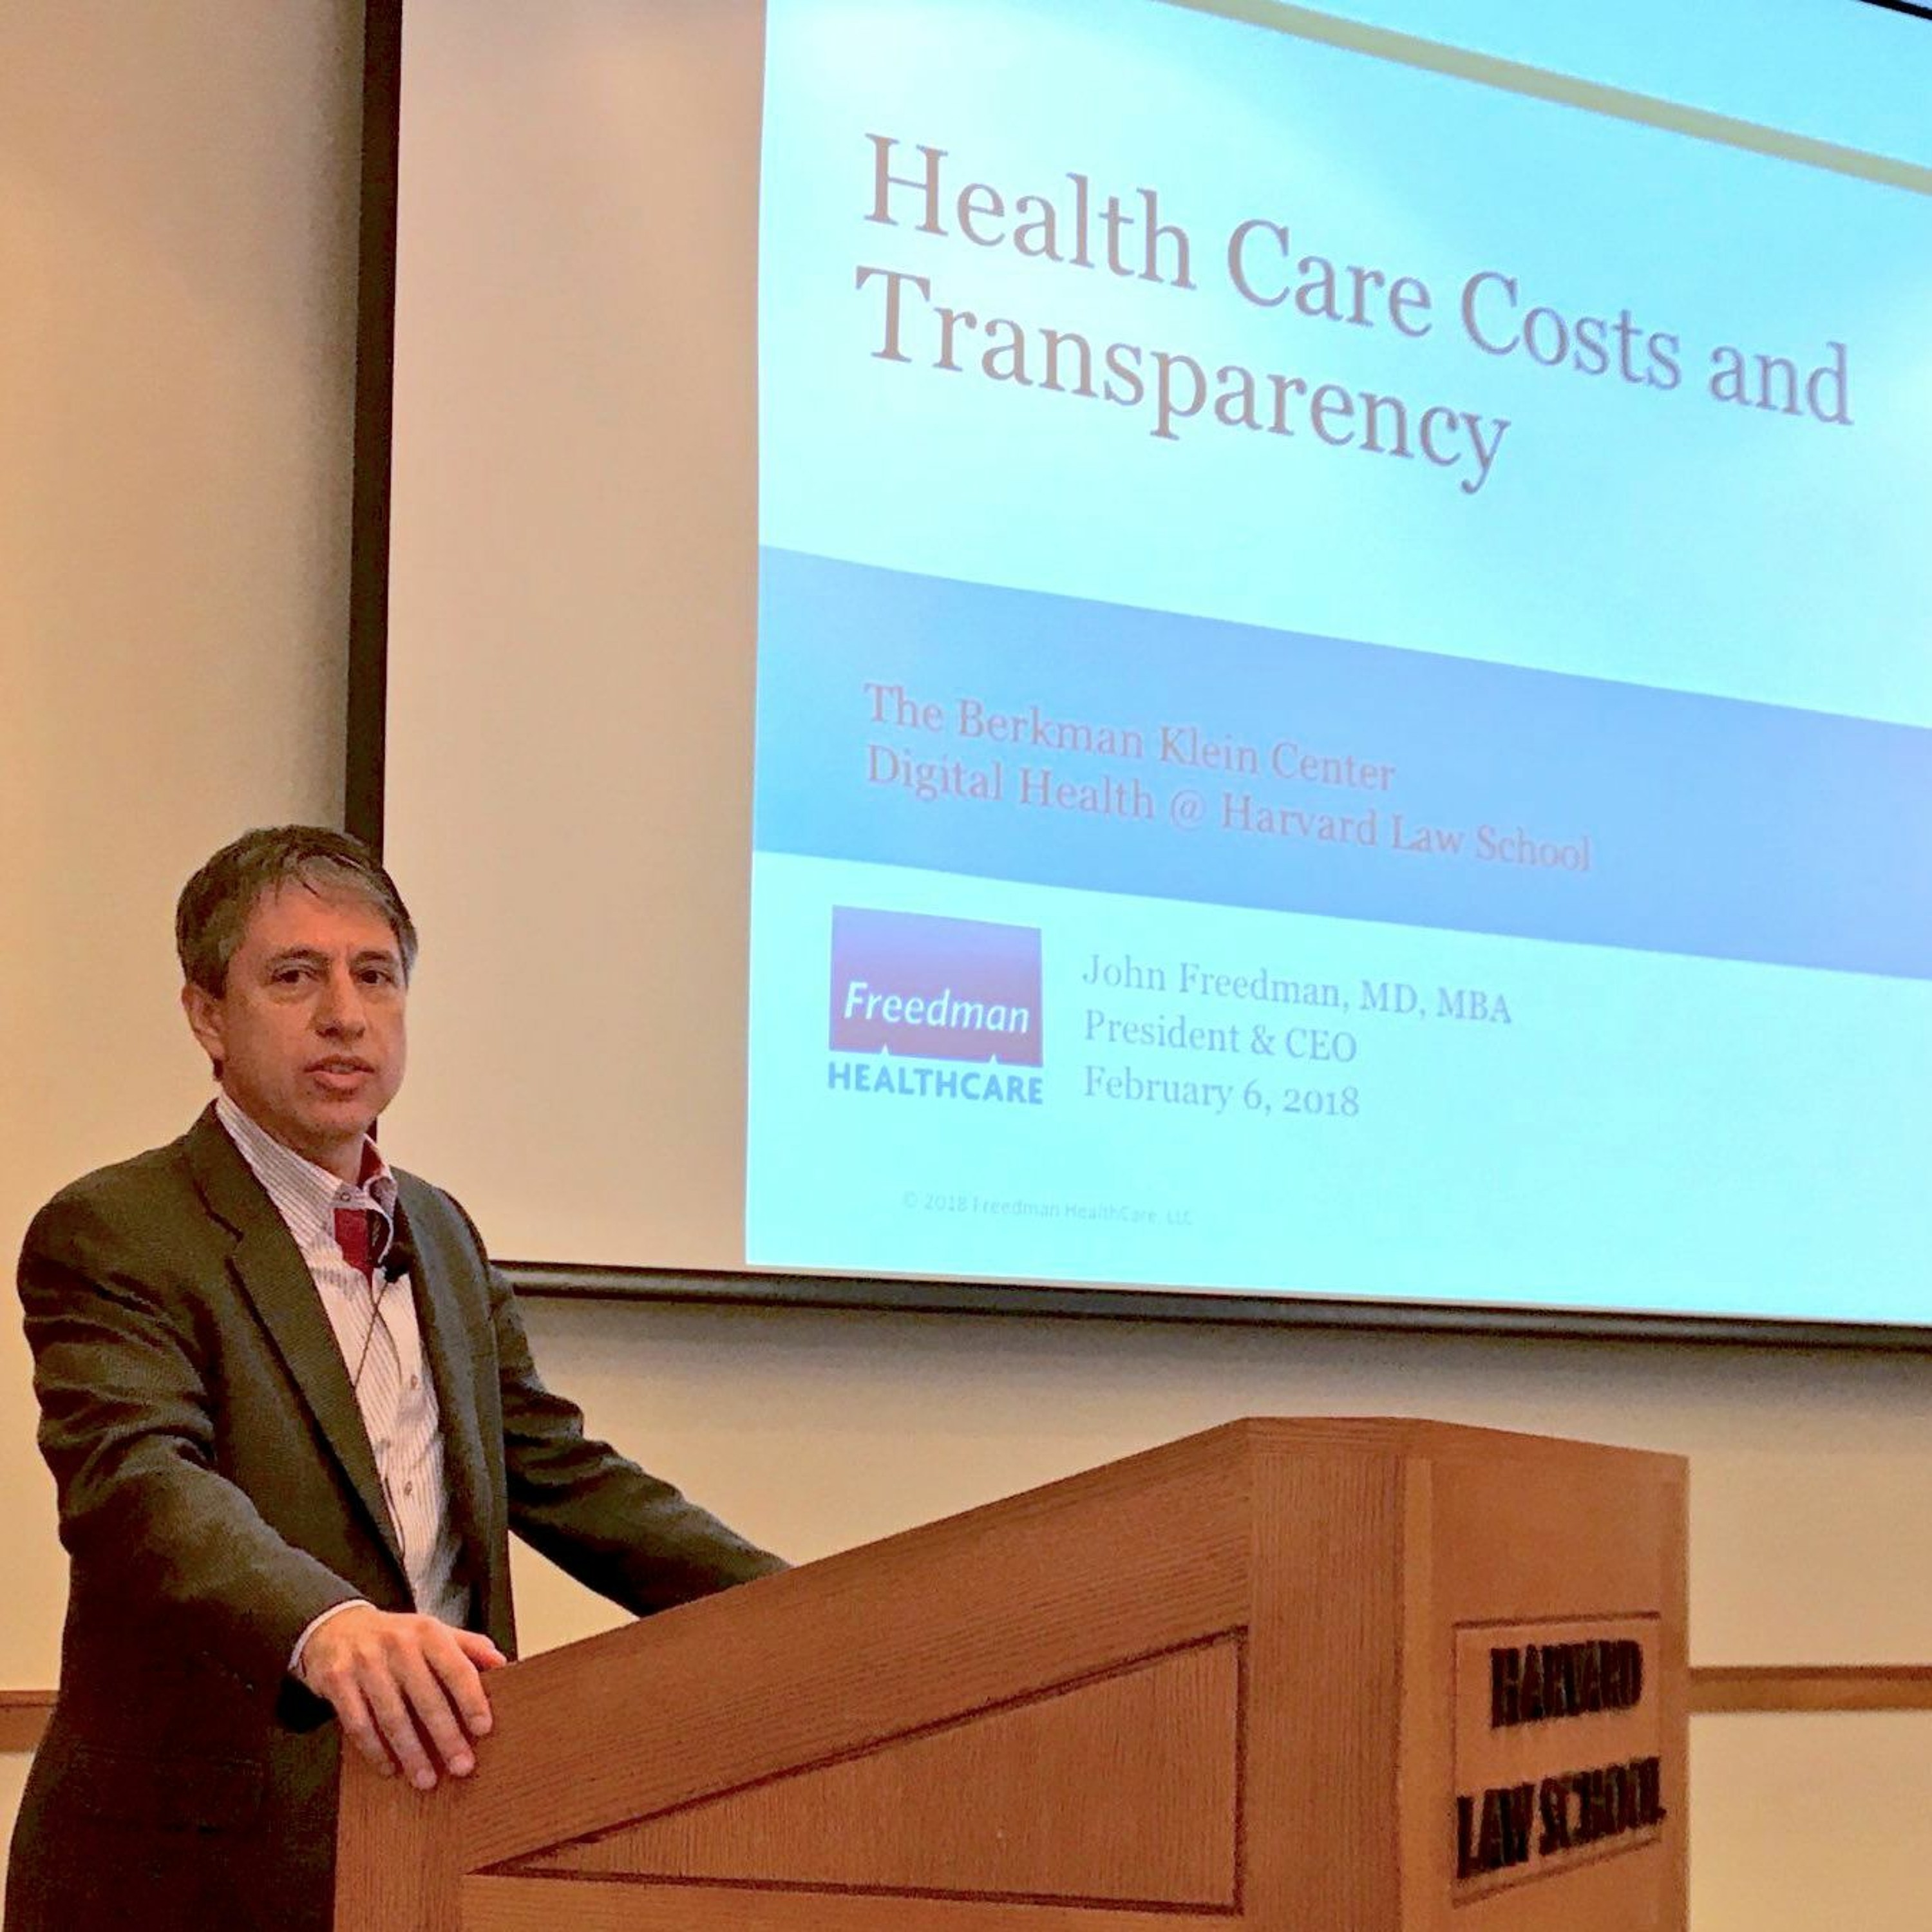 John Freedman on Health Care Costs and Transparency